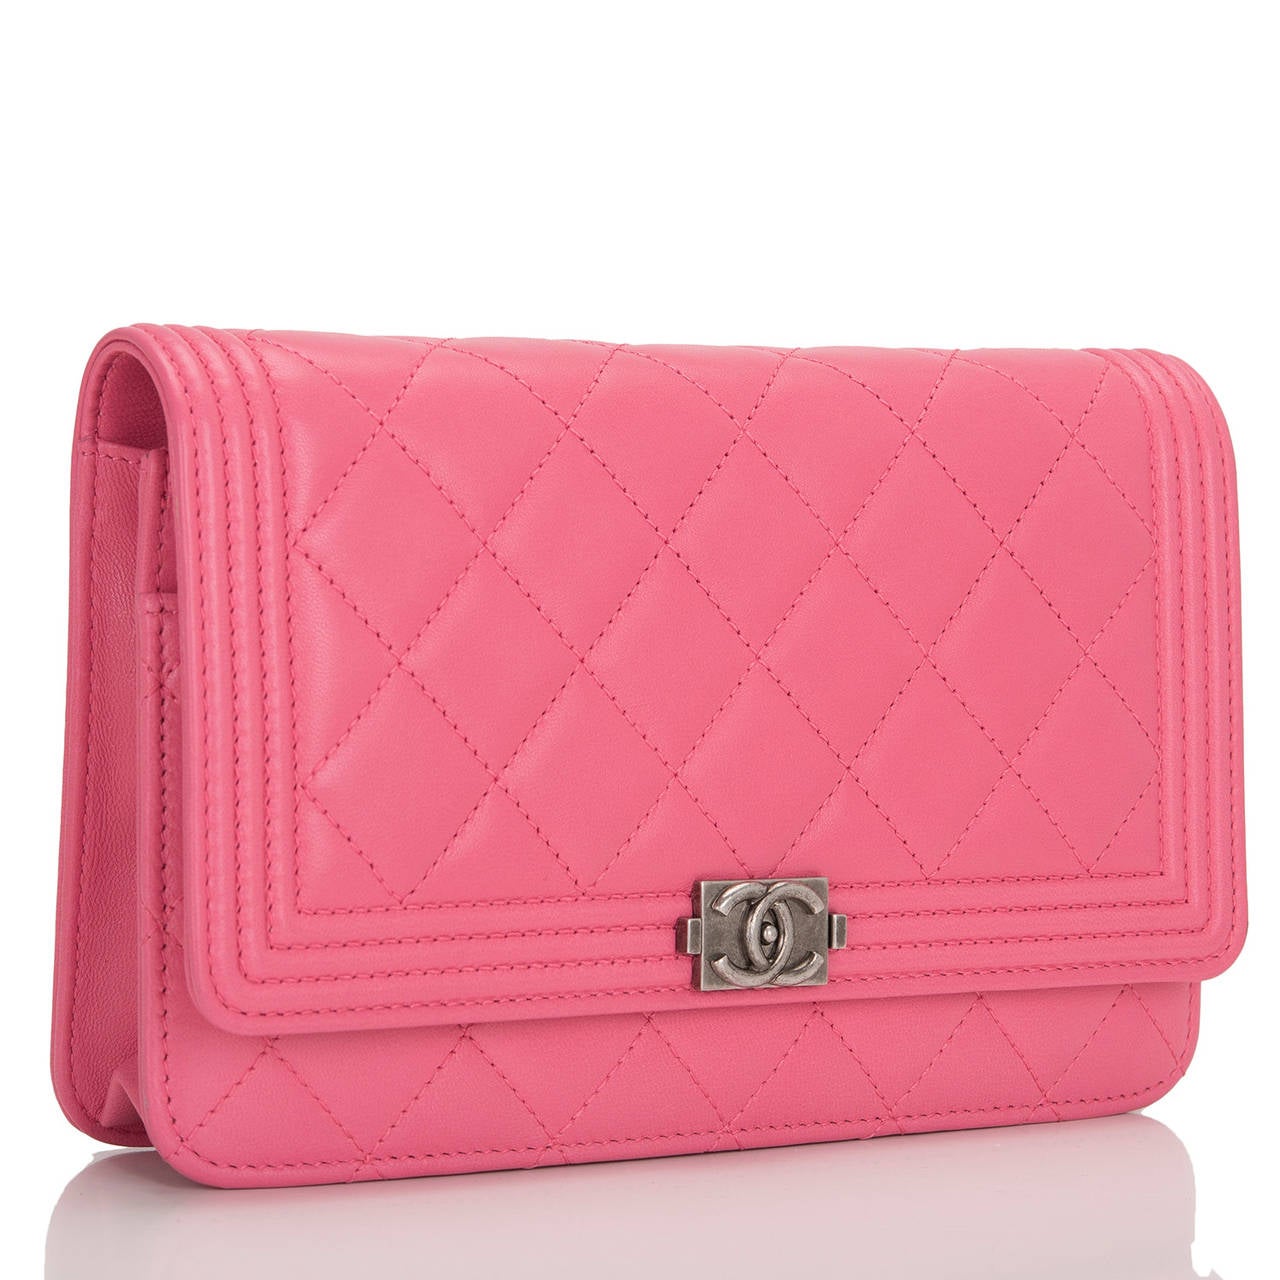 This gorgeous Chanel Pink Quilted Lambskin Le Boy Wallet on Chain with aged ruthenium hardware features a front flap with the signature Le Boy CC charm and hidden snap closure and aged ruthenium chain link and pink leather shoulder/crossbody strap